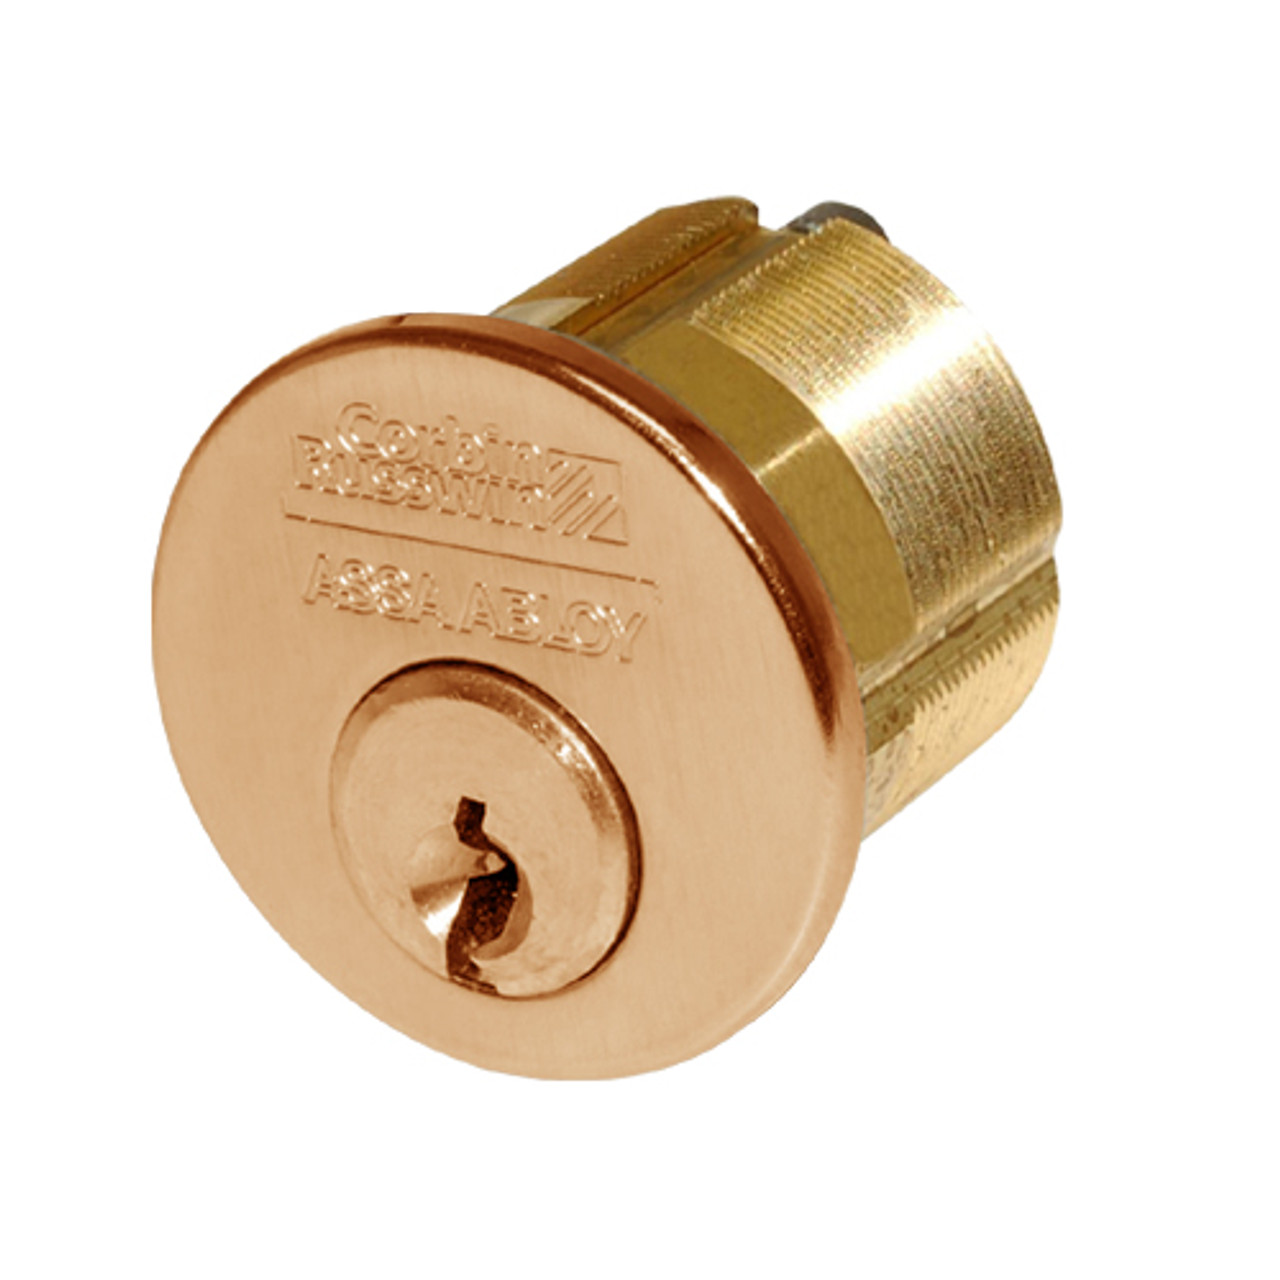 CR1000-118-A01-6-N27-612 Corbin Conventional Mortise Cylinder for Mortise Lock and DL3000 Deadlocks with Cloverleaf Cam in Satin Bronze Finish